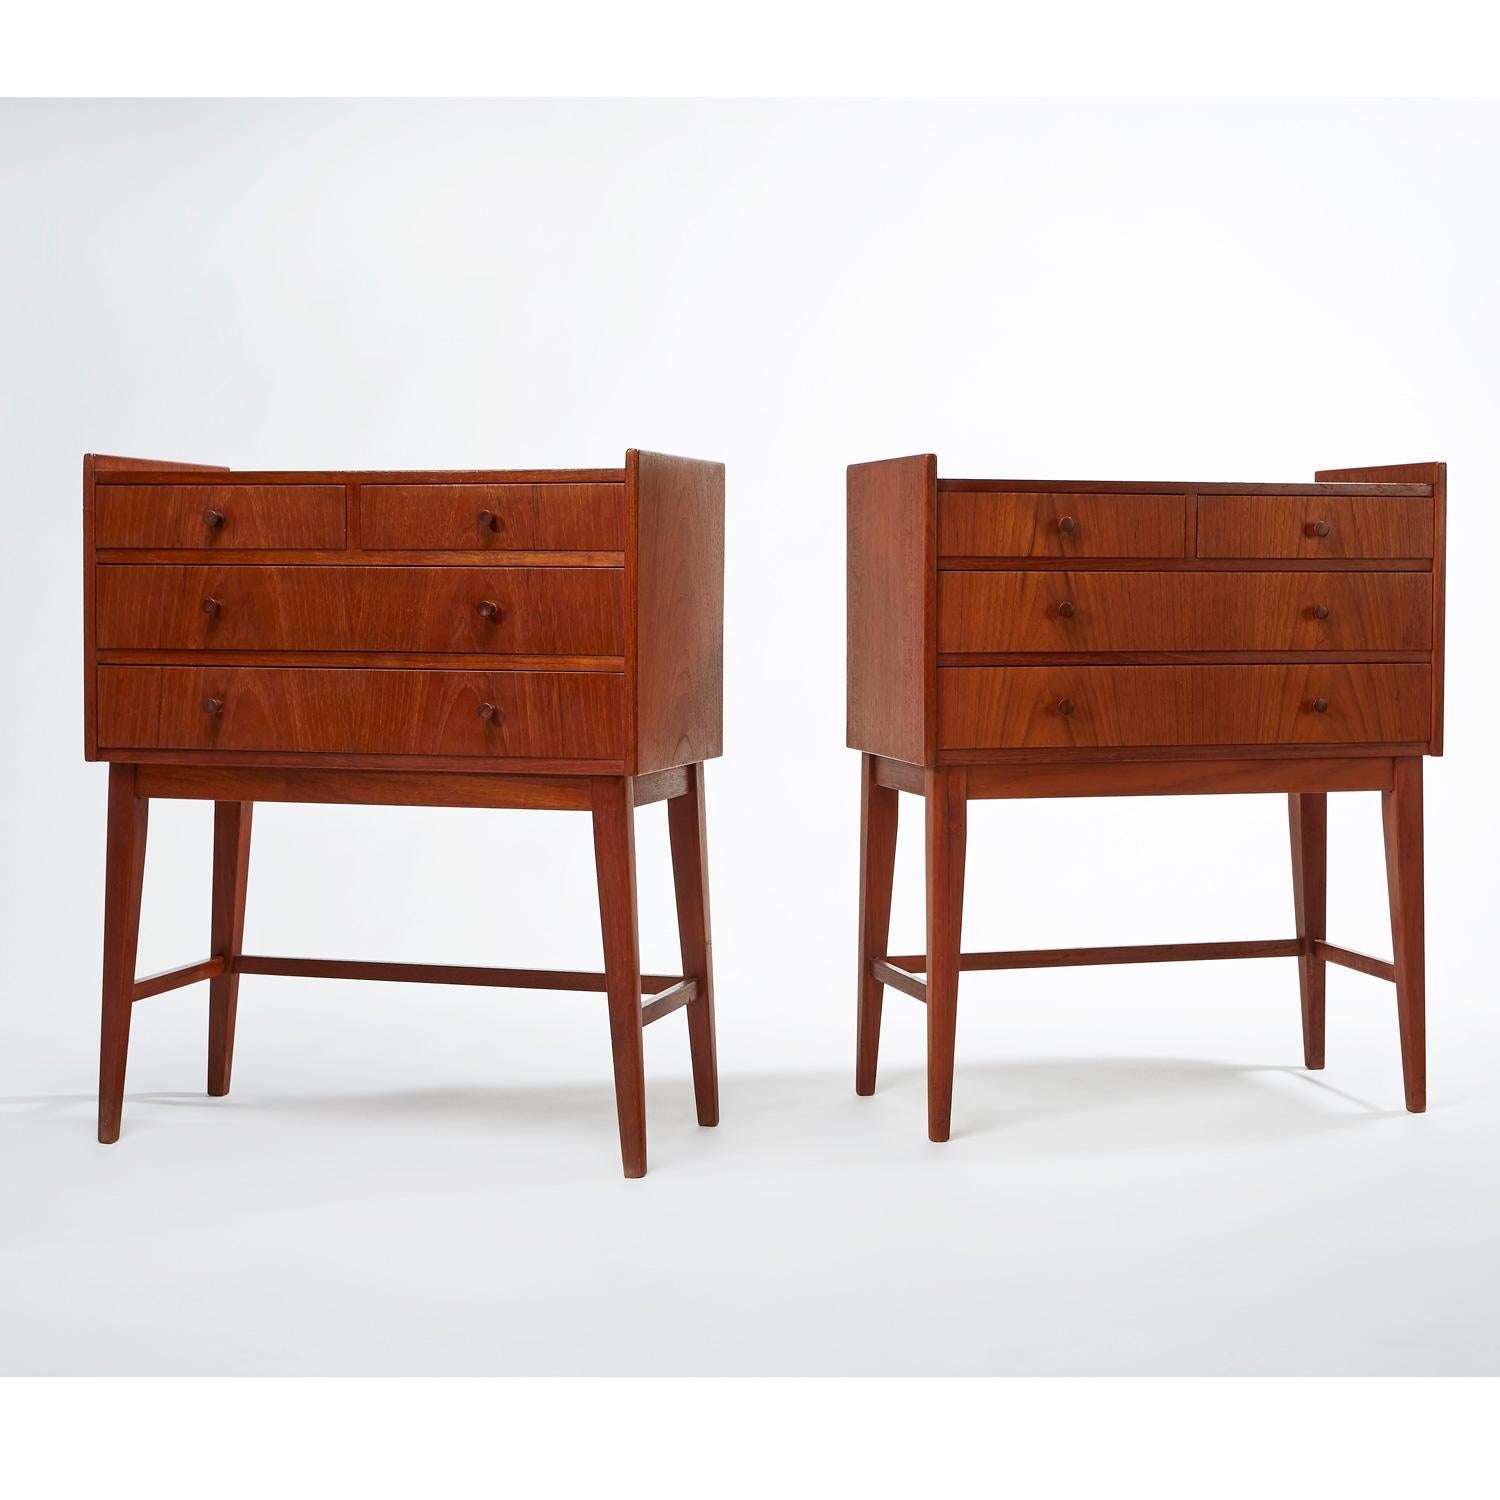 Pair of early Mid-Century Modern Scandinavian teak nightstands, or petite chest of drawers. Each chest features a set of three drawers, the top is divided to create two smaller drawers, which make for great jewelry storage. The diminutive size,